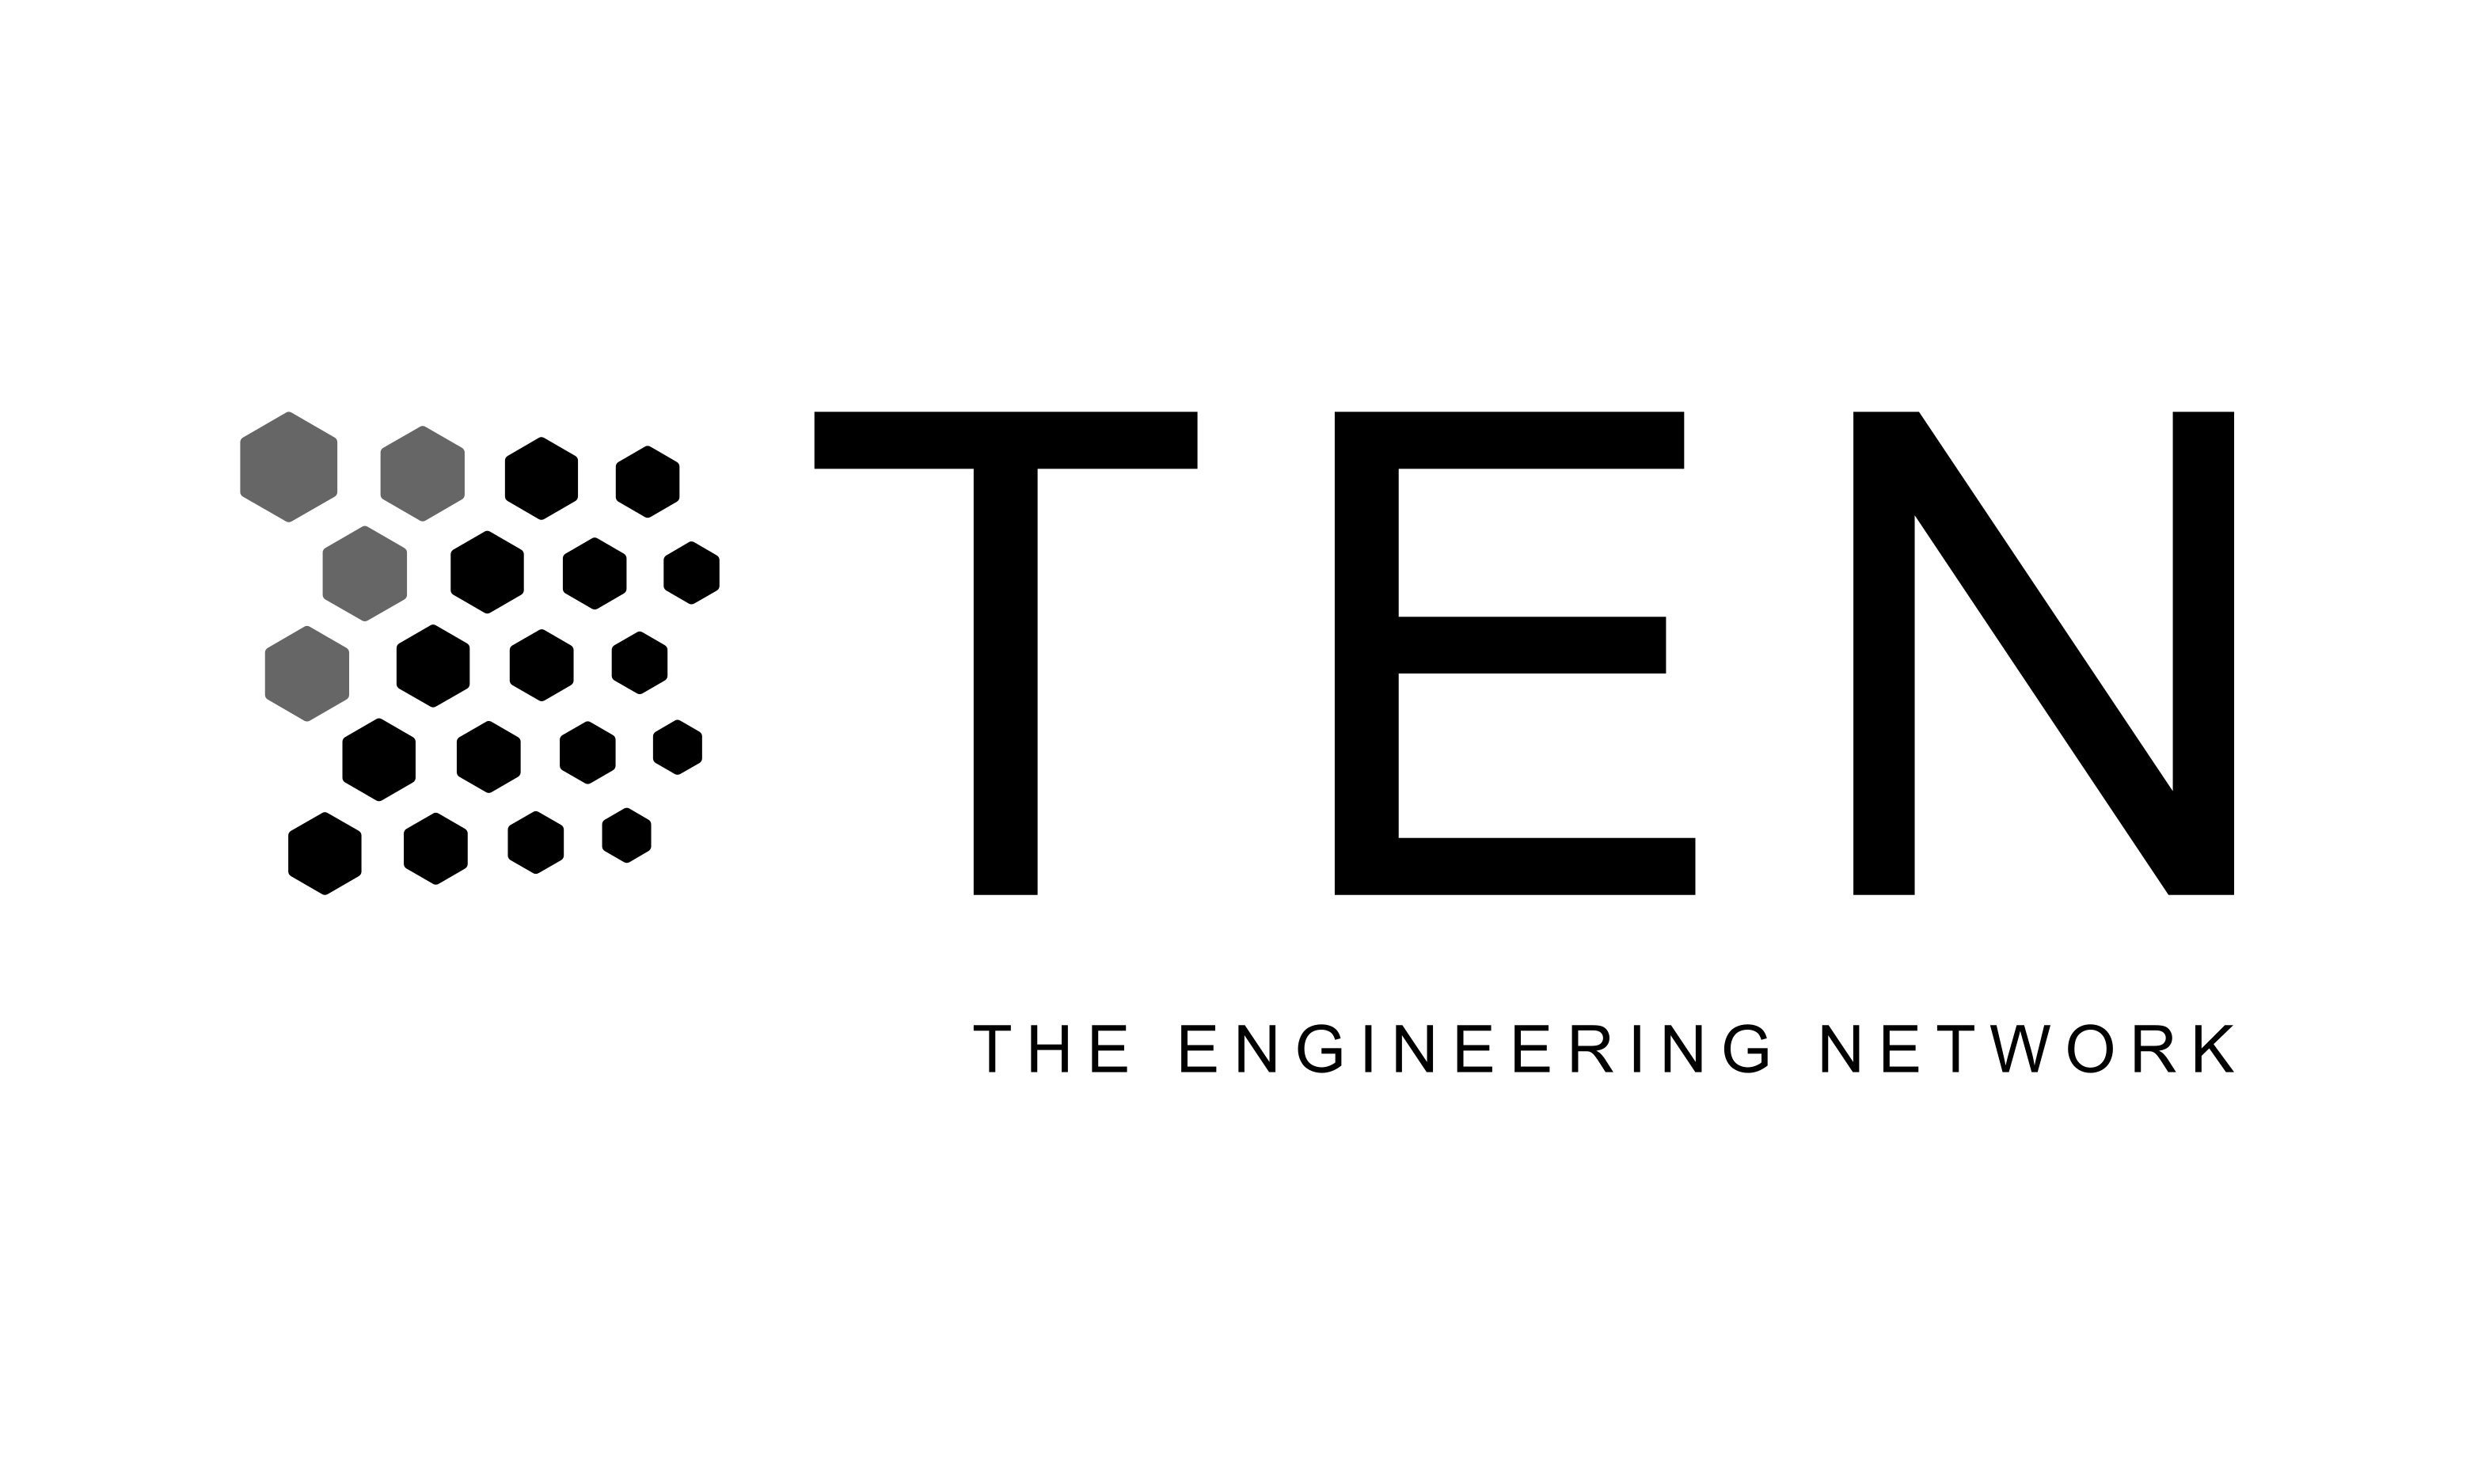 The Engineering Network